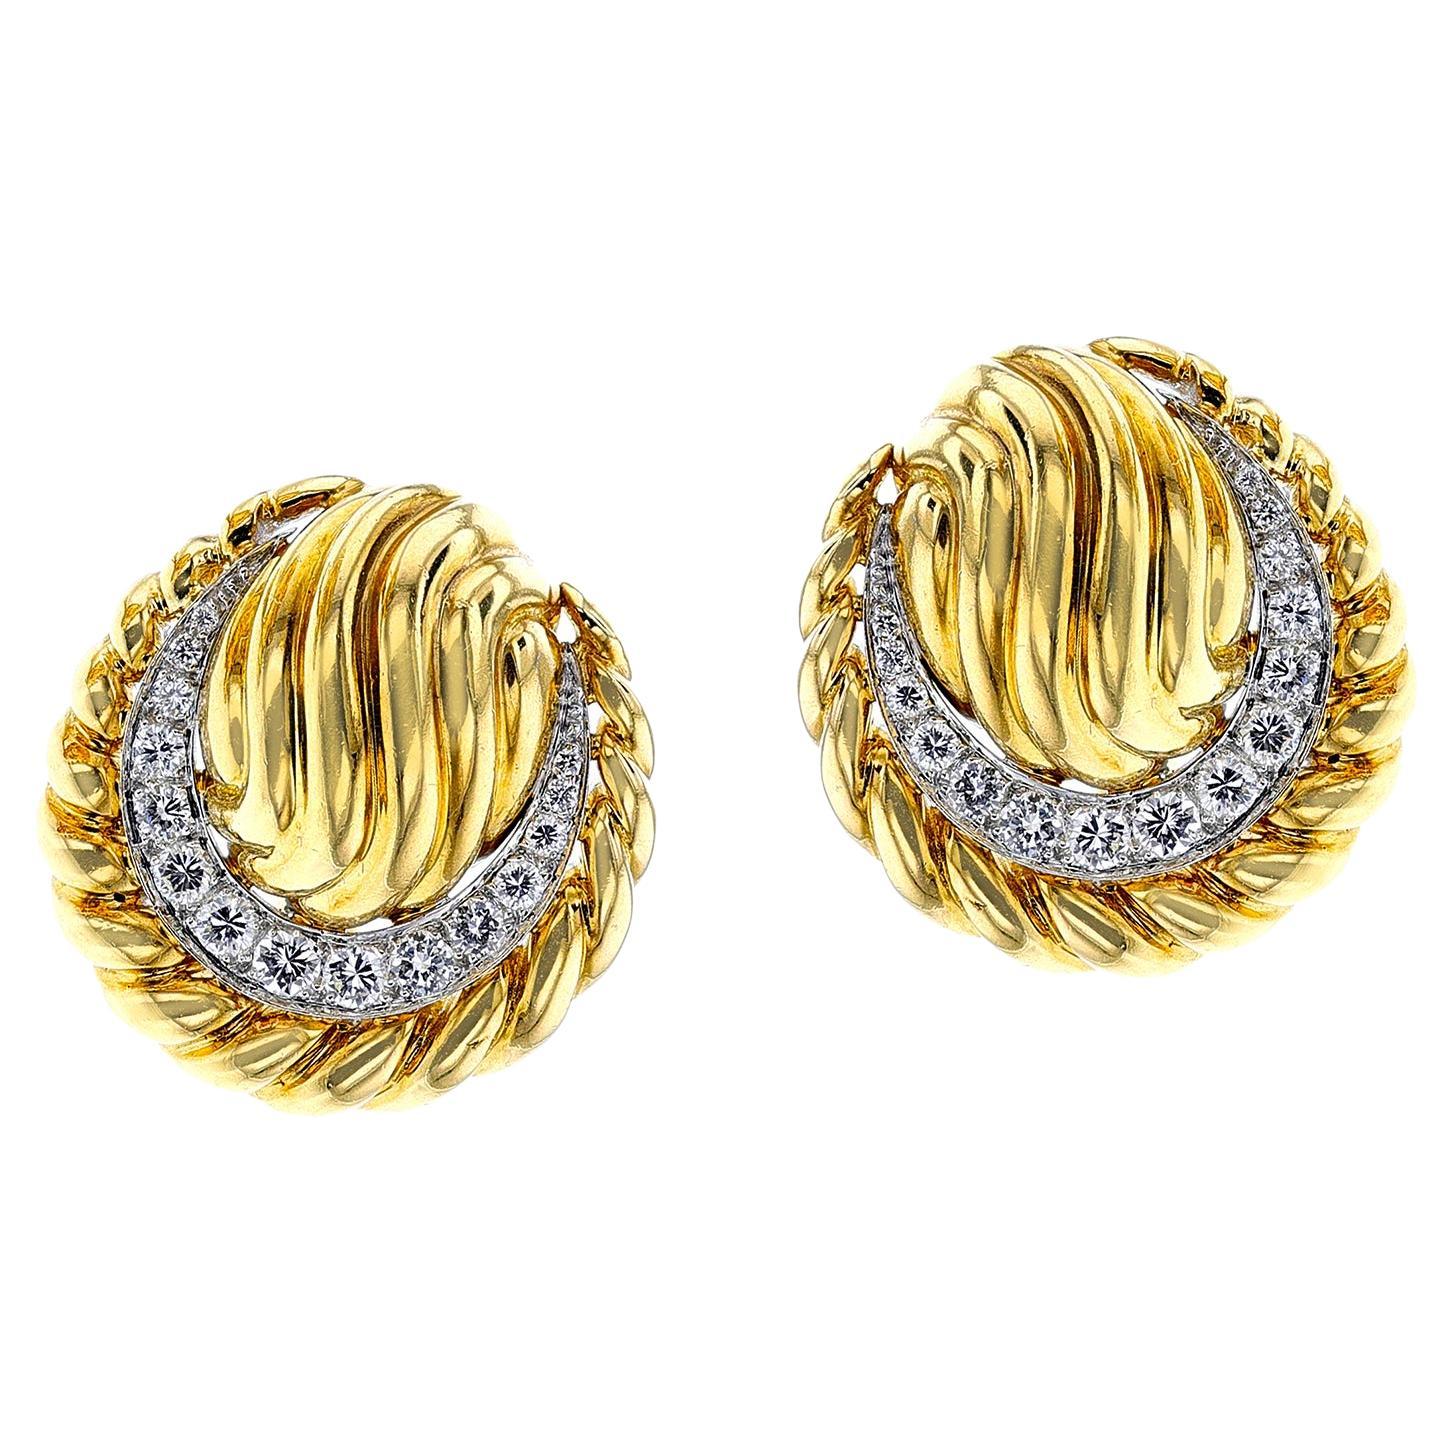 David Webb Textured Gold and Diamond Clip-on Earrings, 18k For Sale